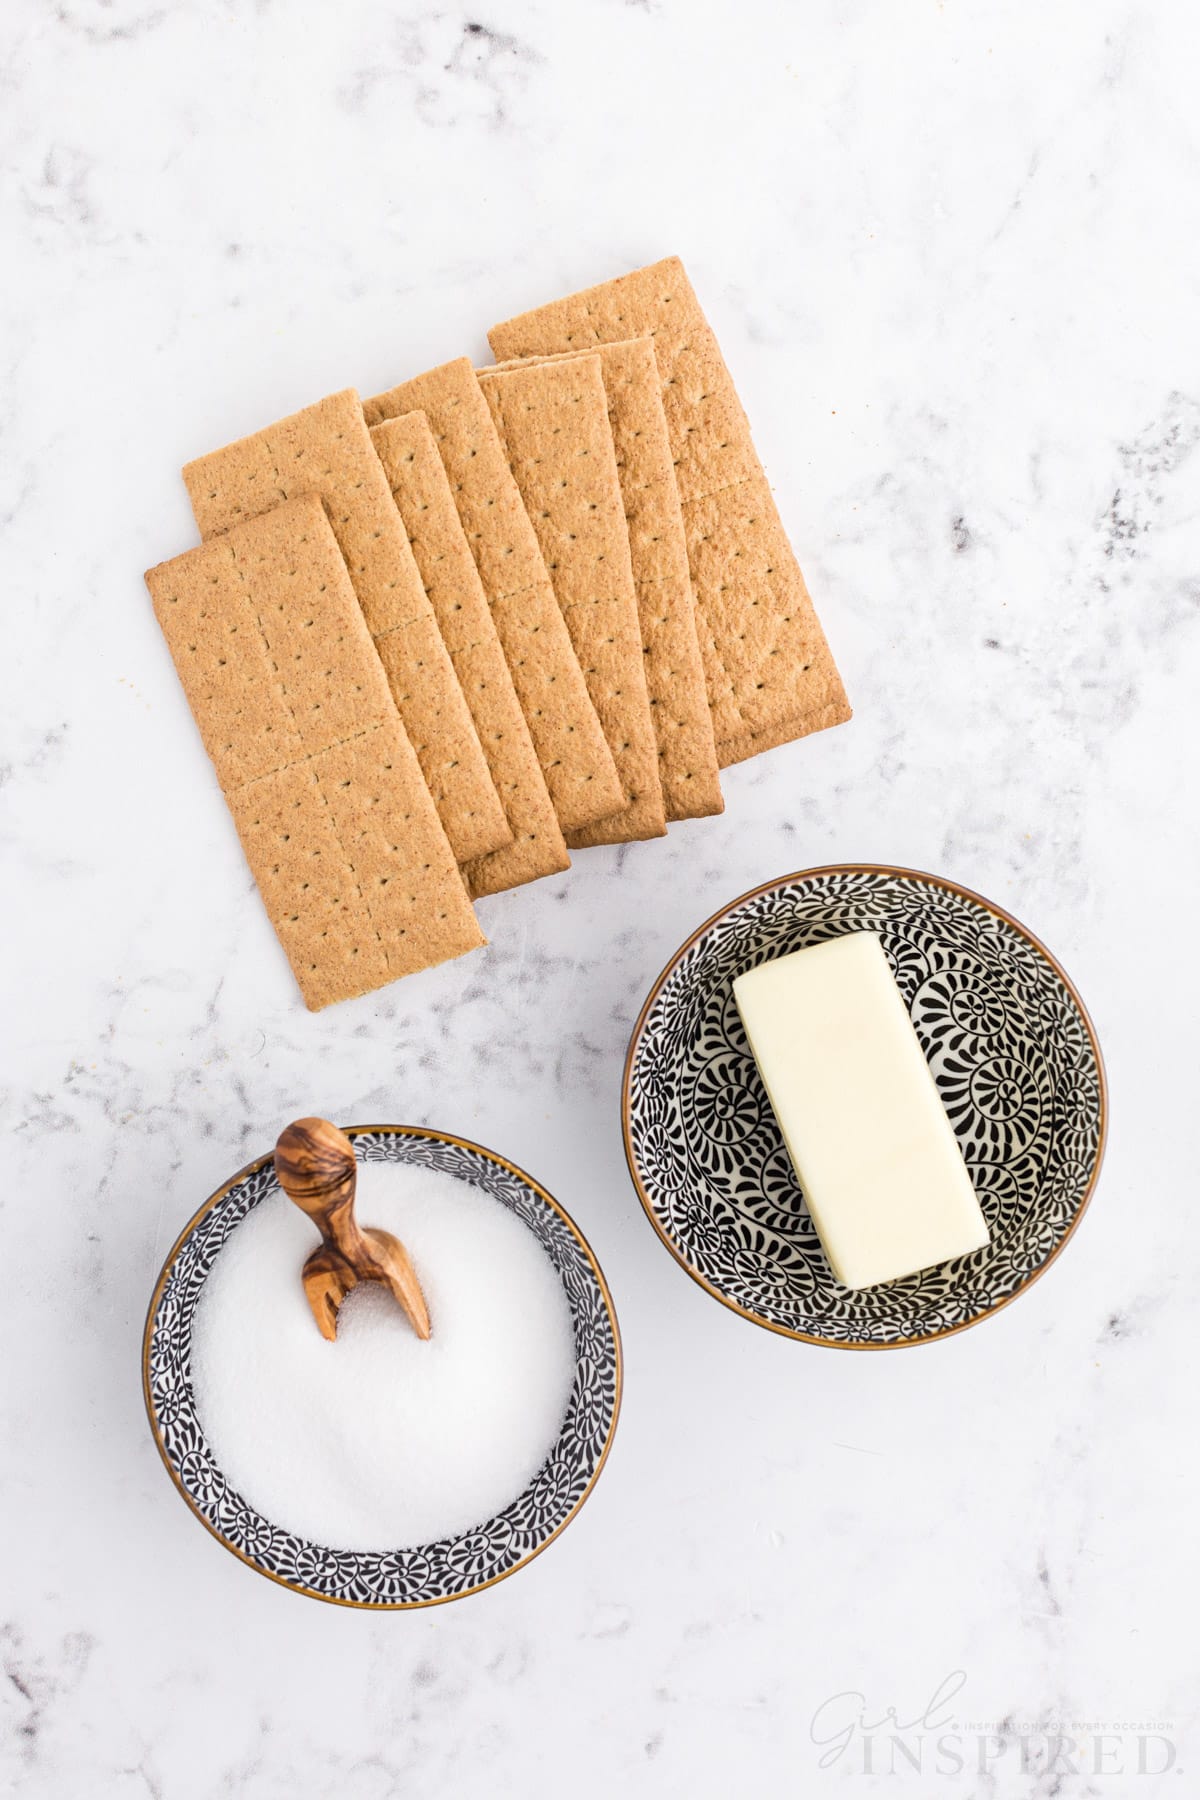 Individual ingredients for graham cracker crust: sugar, butter, and graham crackers.